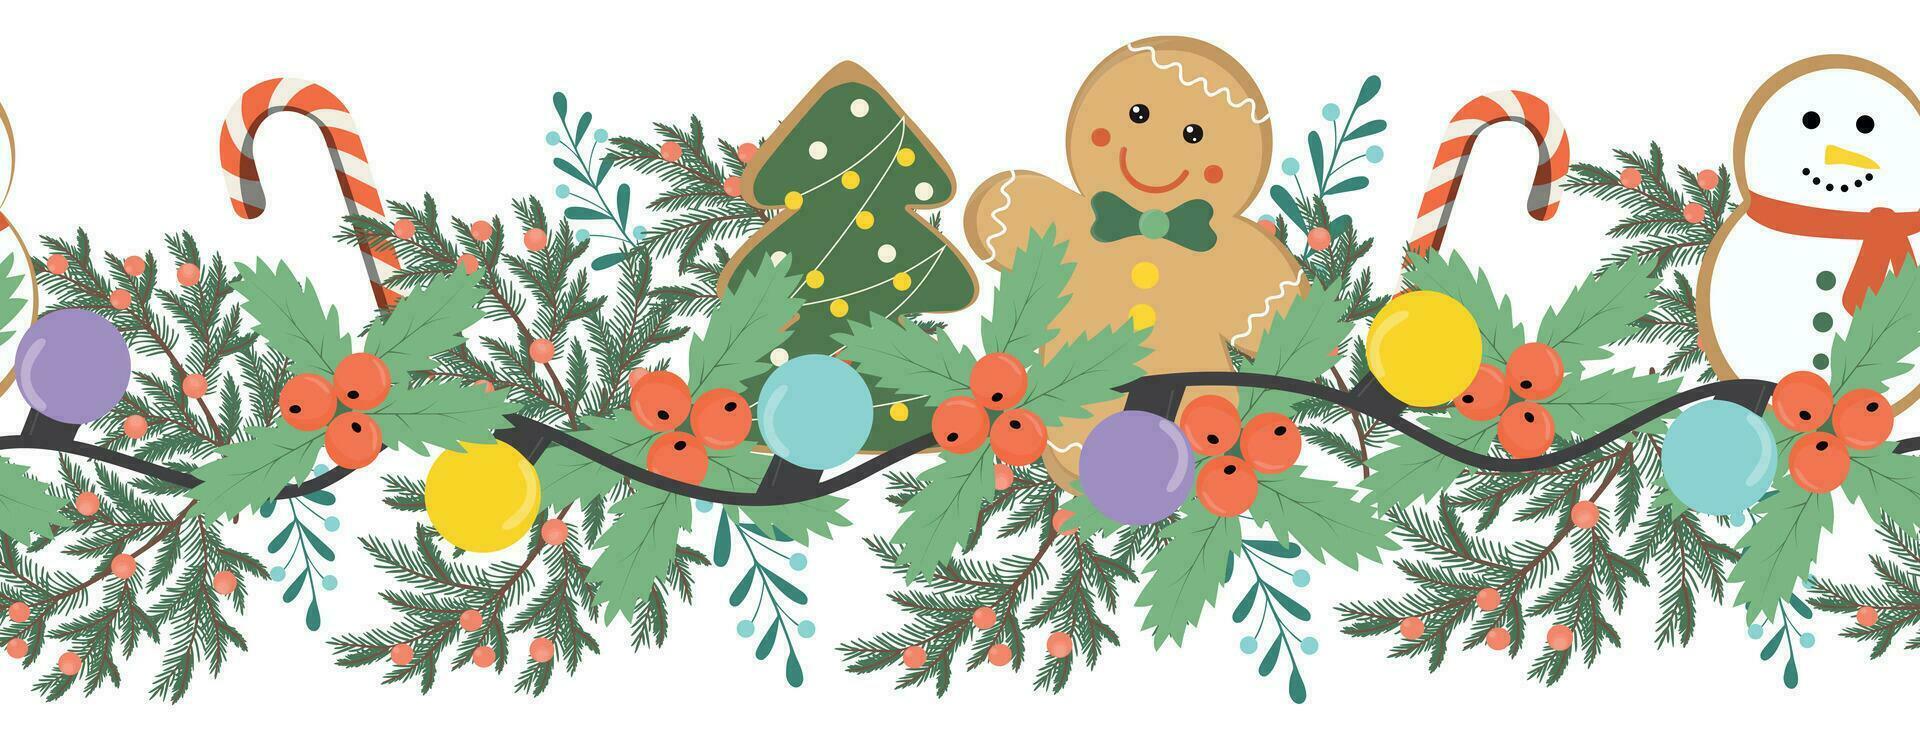 Fir wreath garland with candy gingerbread decoration ornament vector